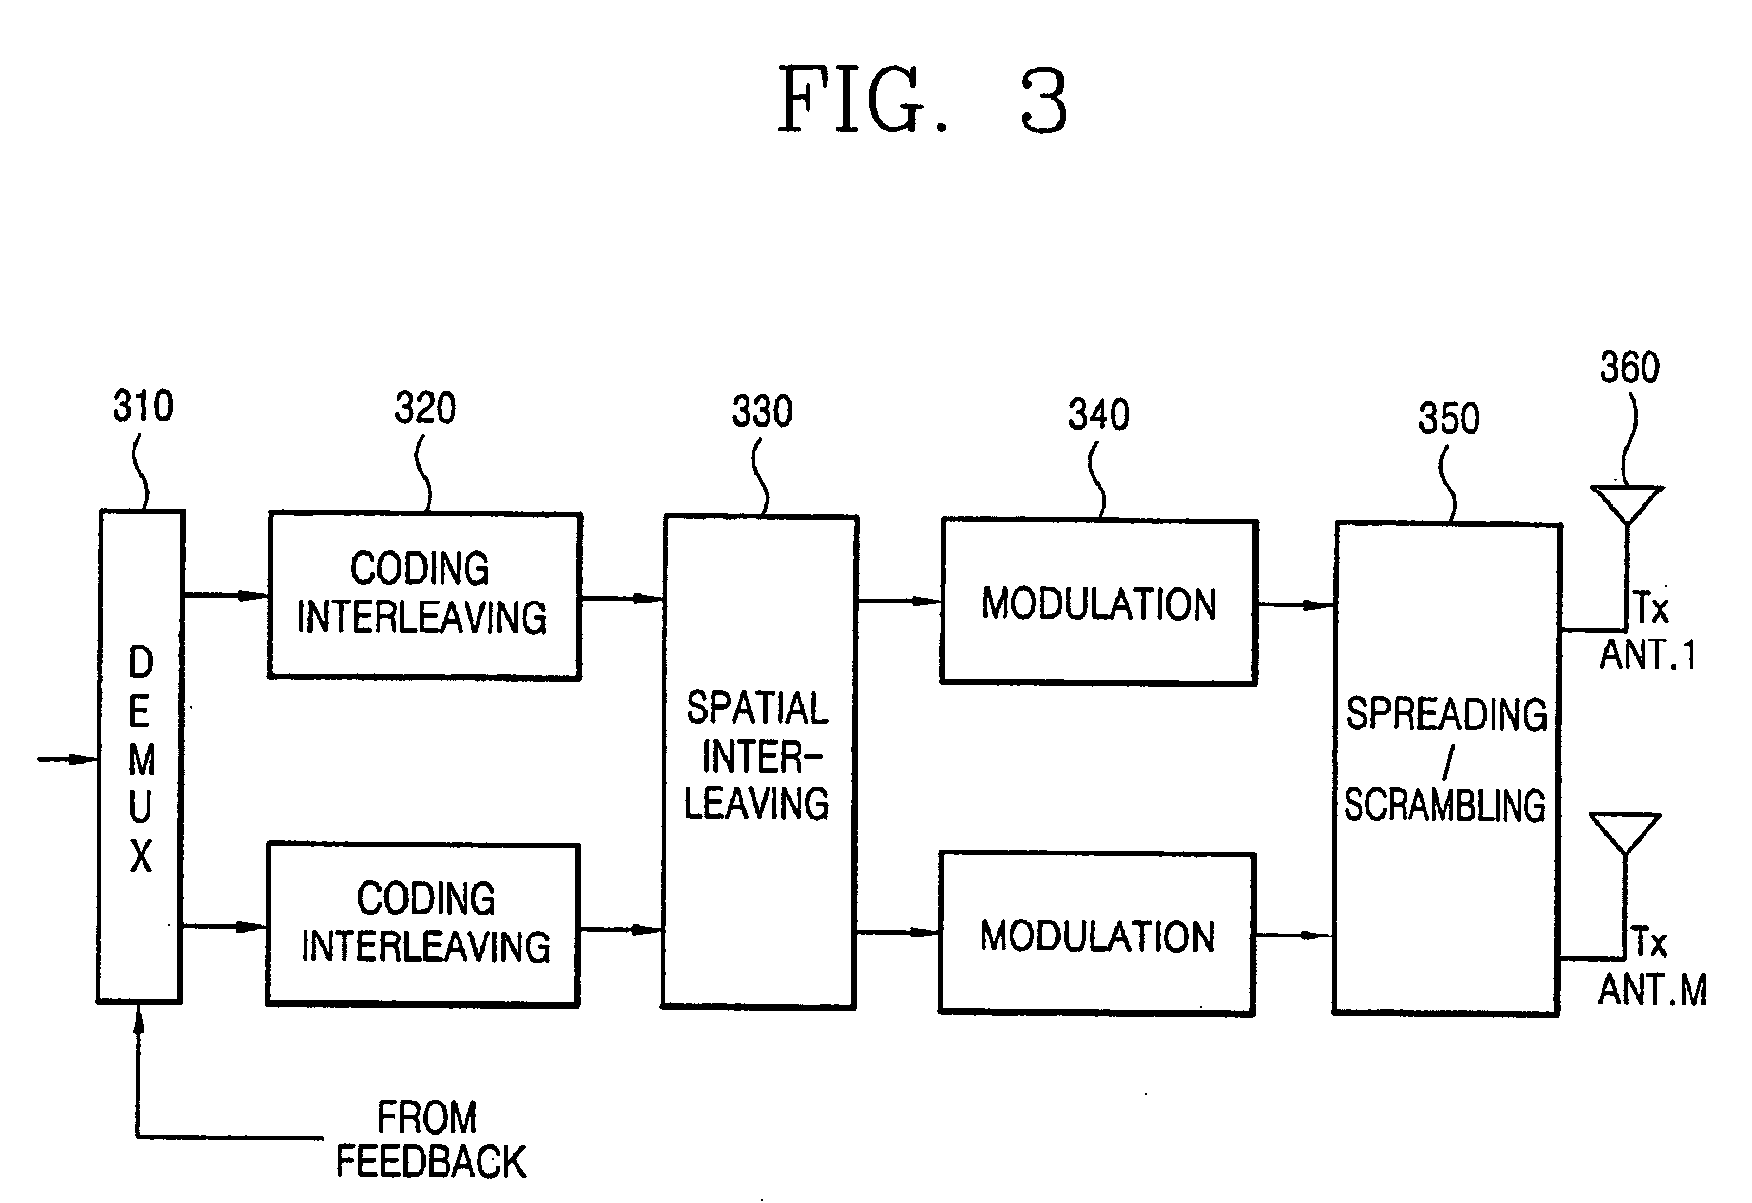 Signal processing apparatus and method in multi-input/multi-output communications systems